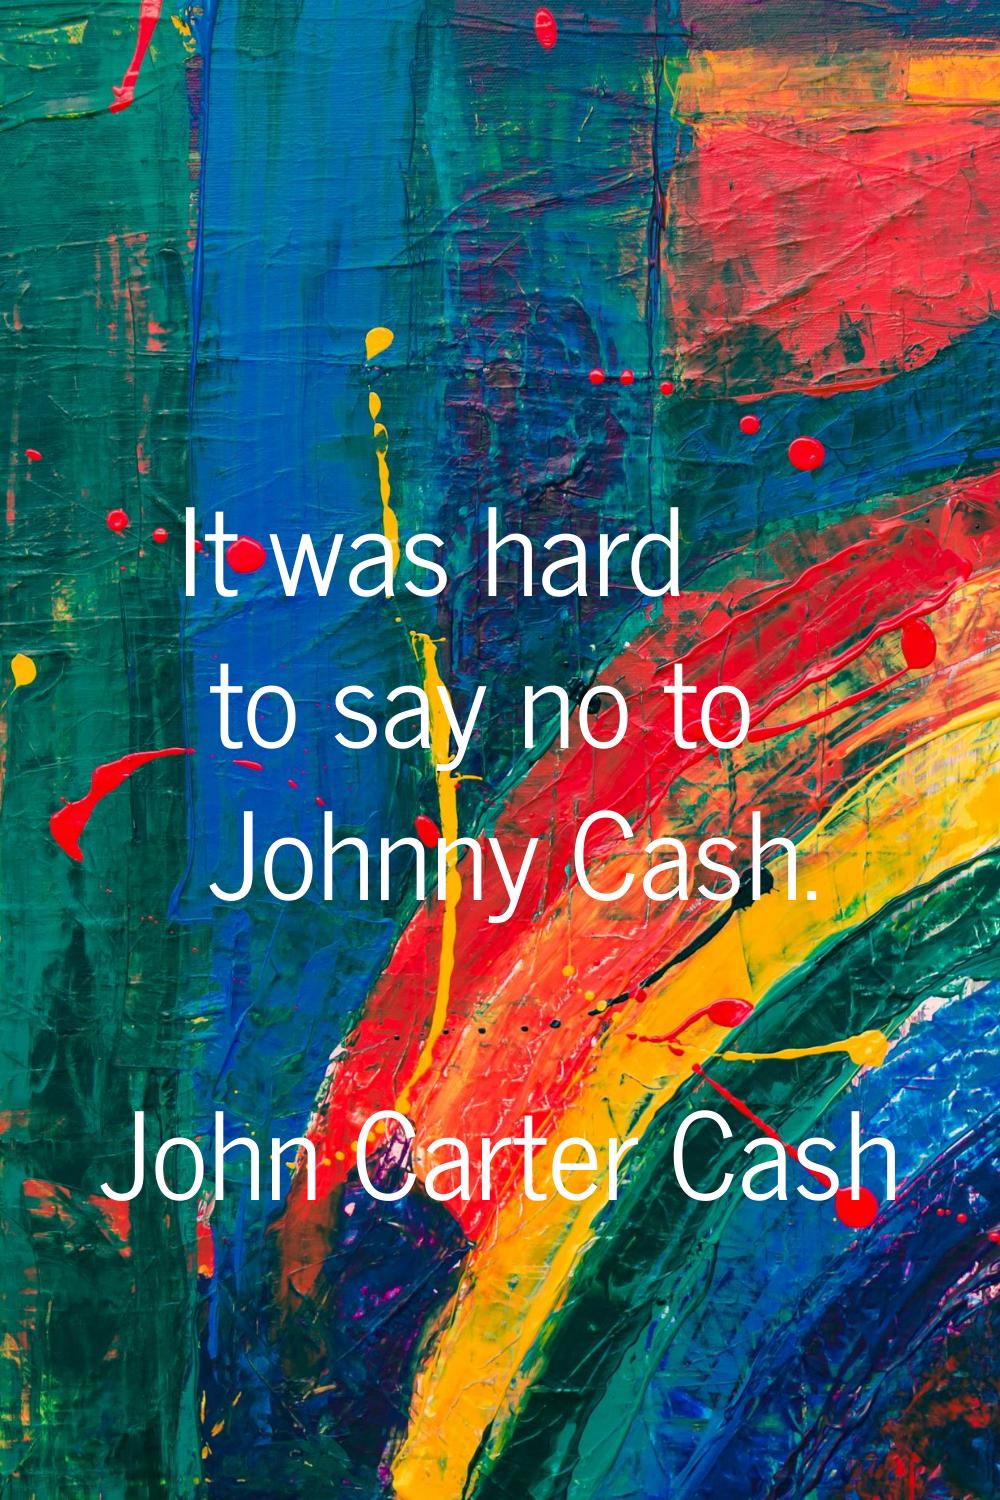 It was hard to say no to Johnny Cash.